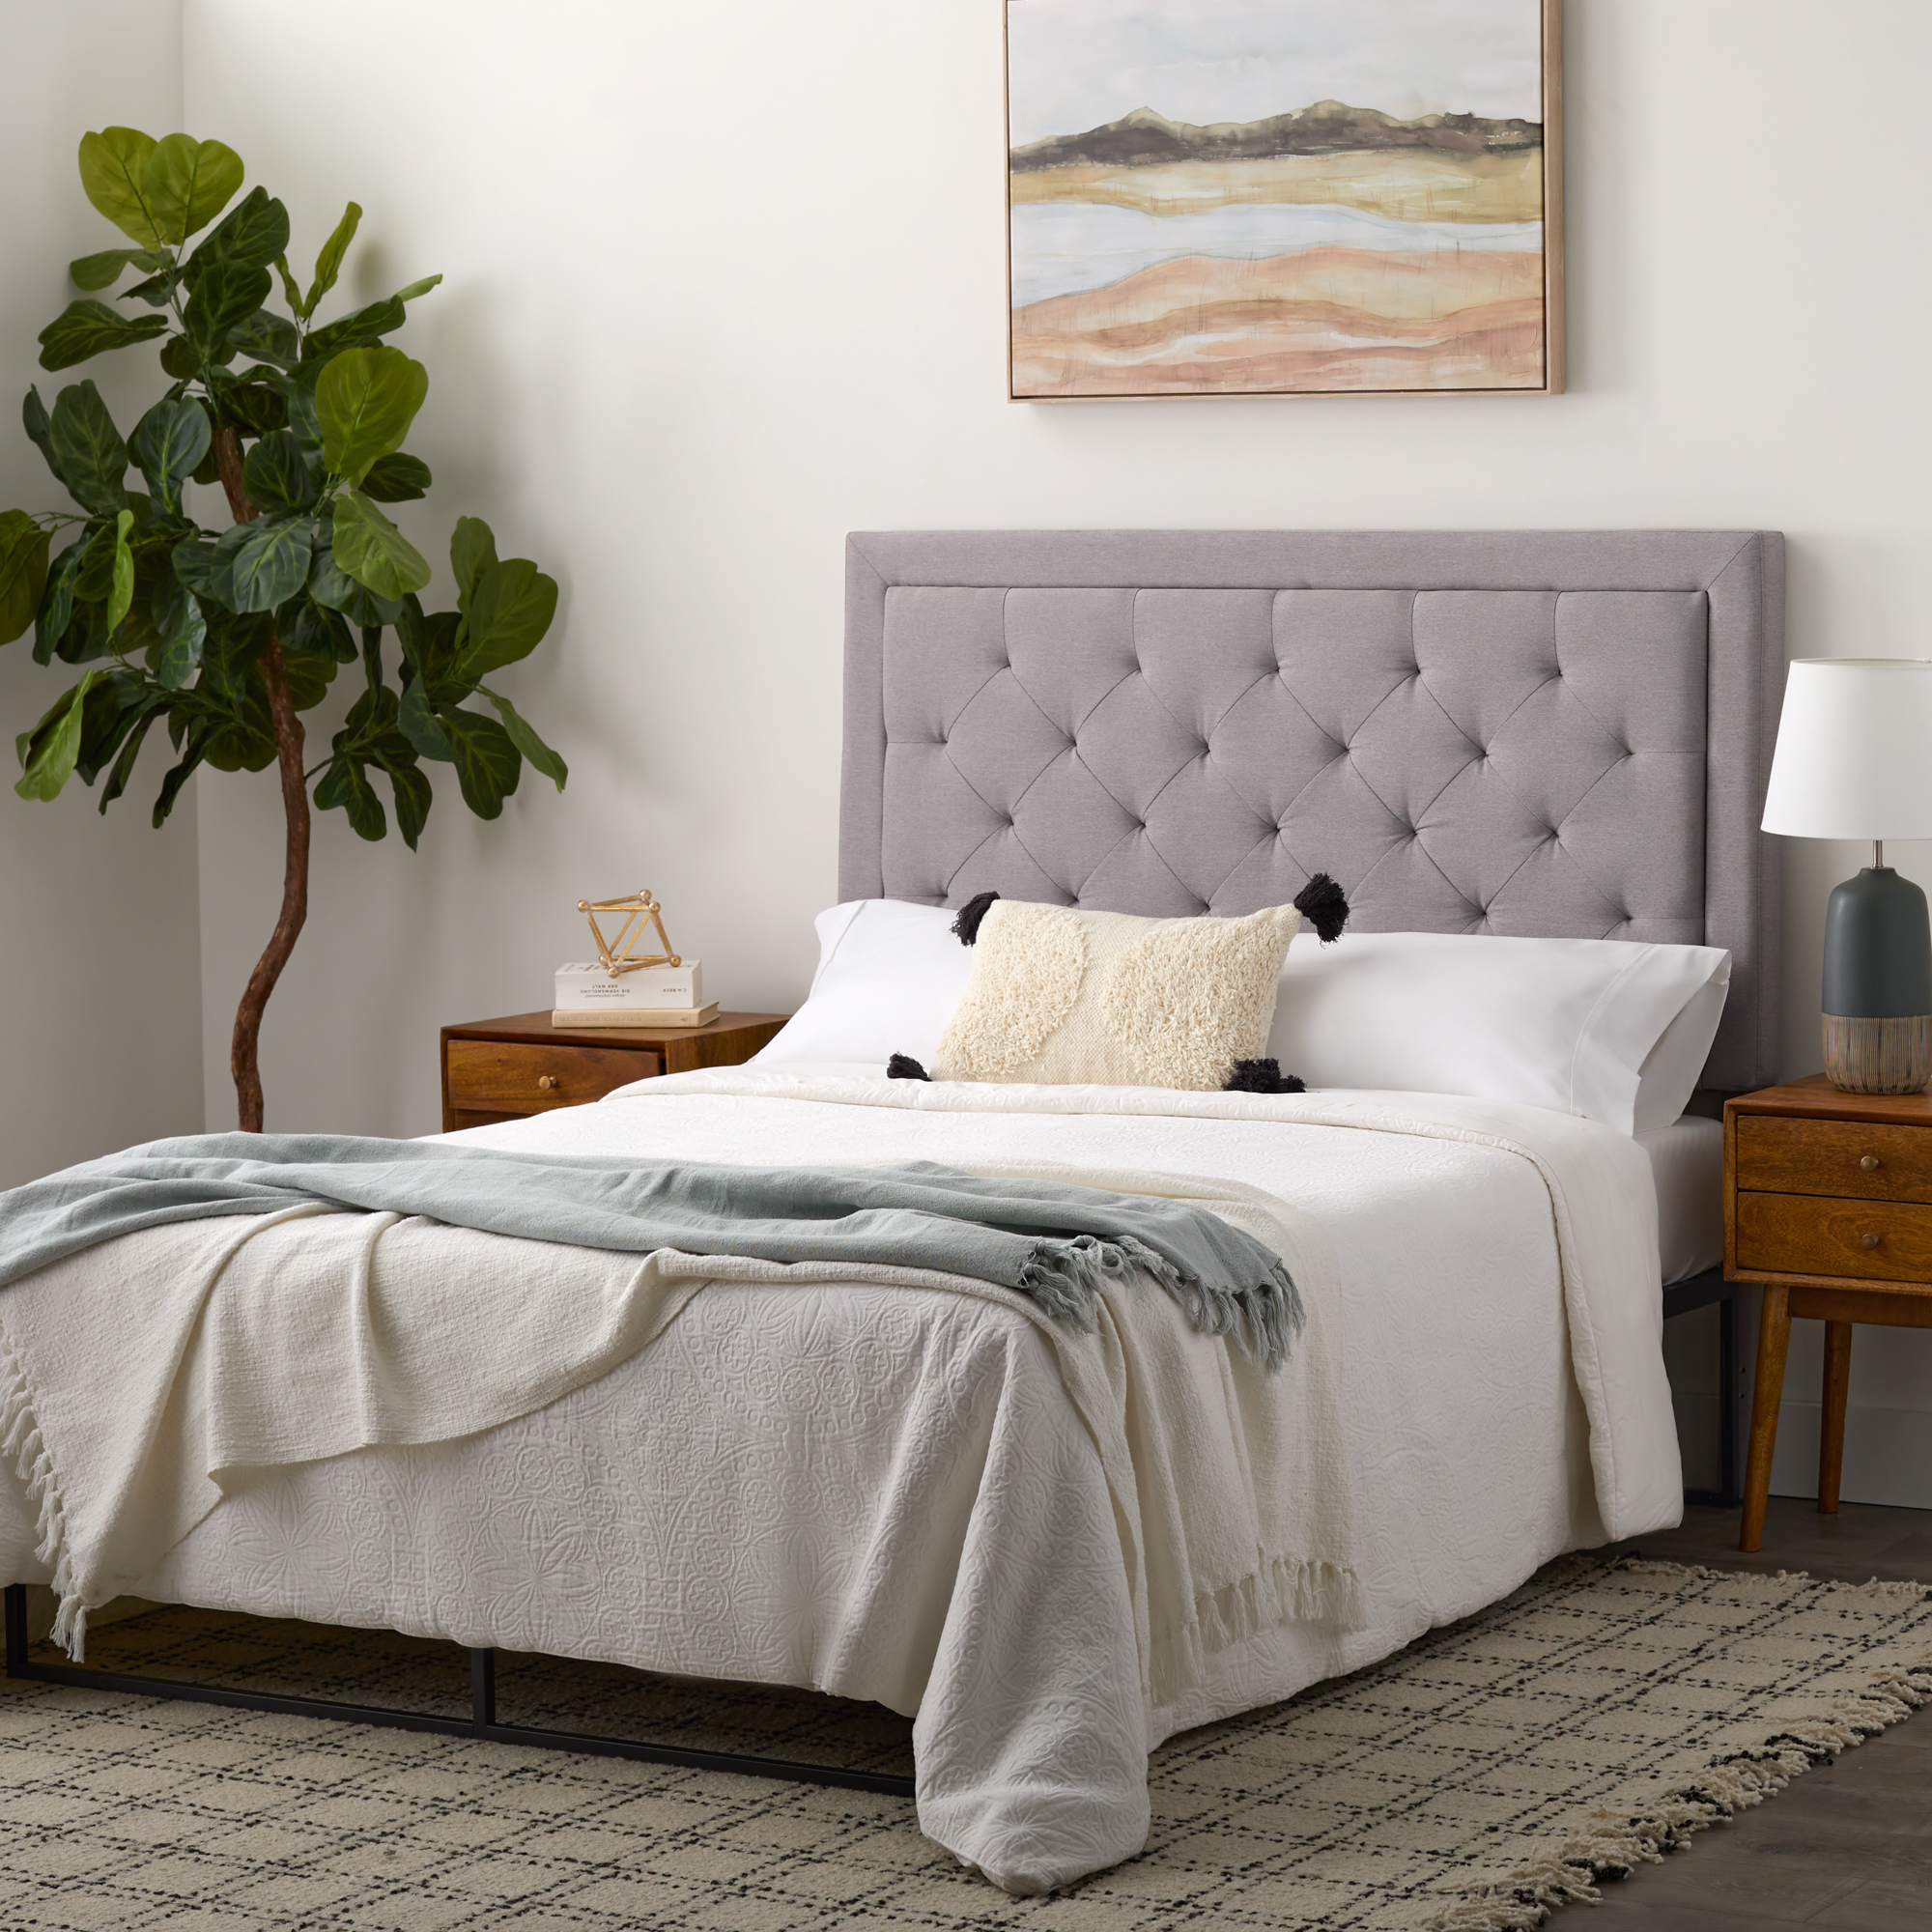 Rest Haven Medford Rectangle Upholstered Headboard with Diamond Tufting, Queen, Gray - image 4 of 12